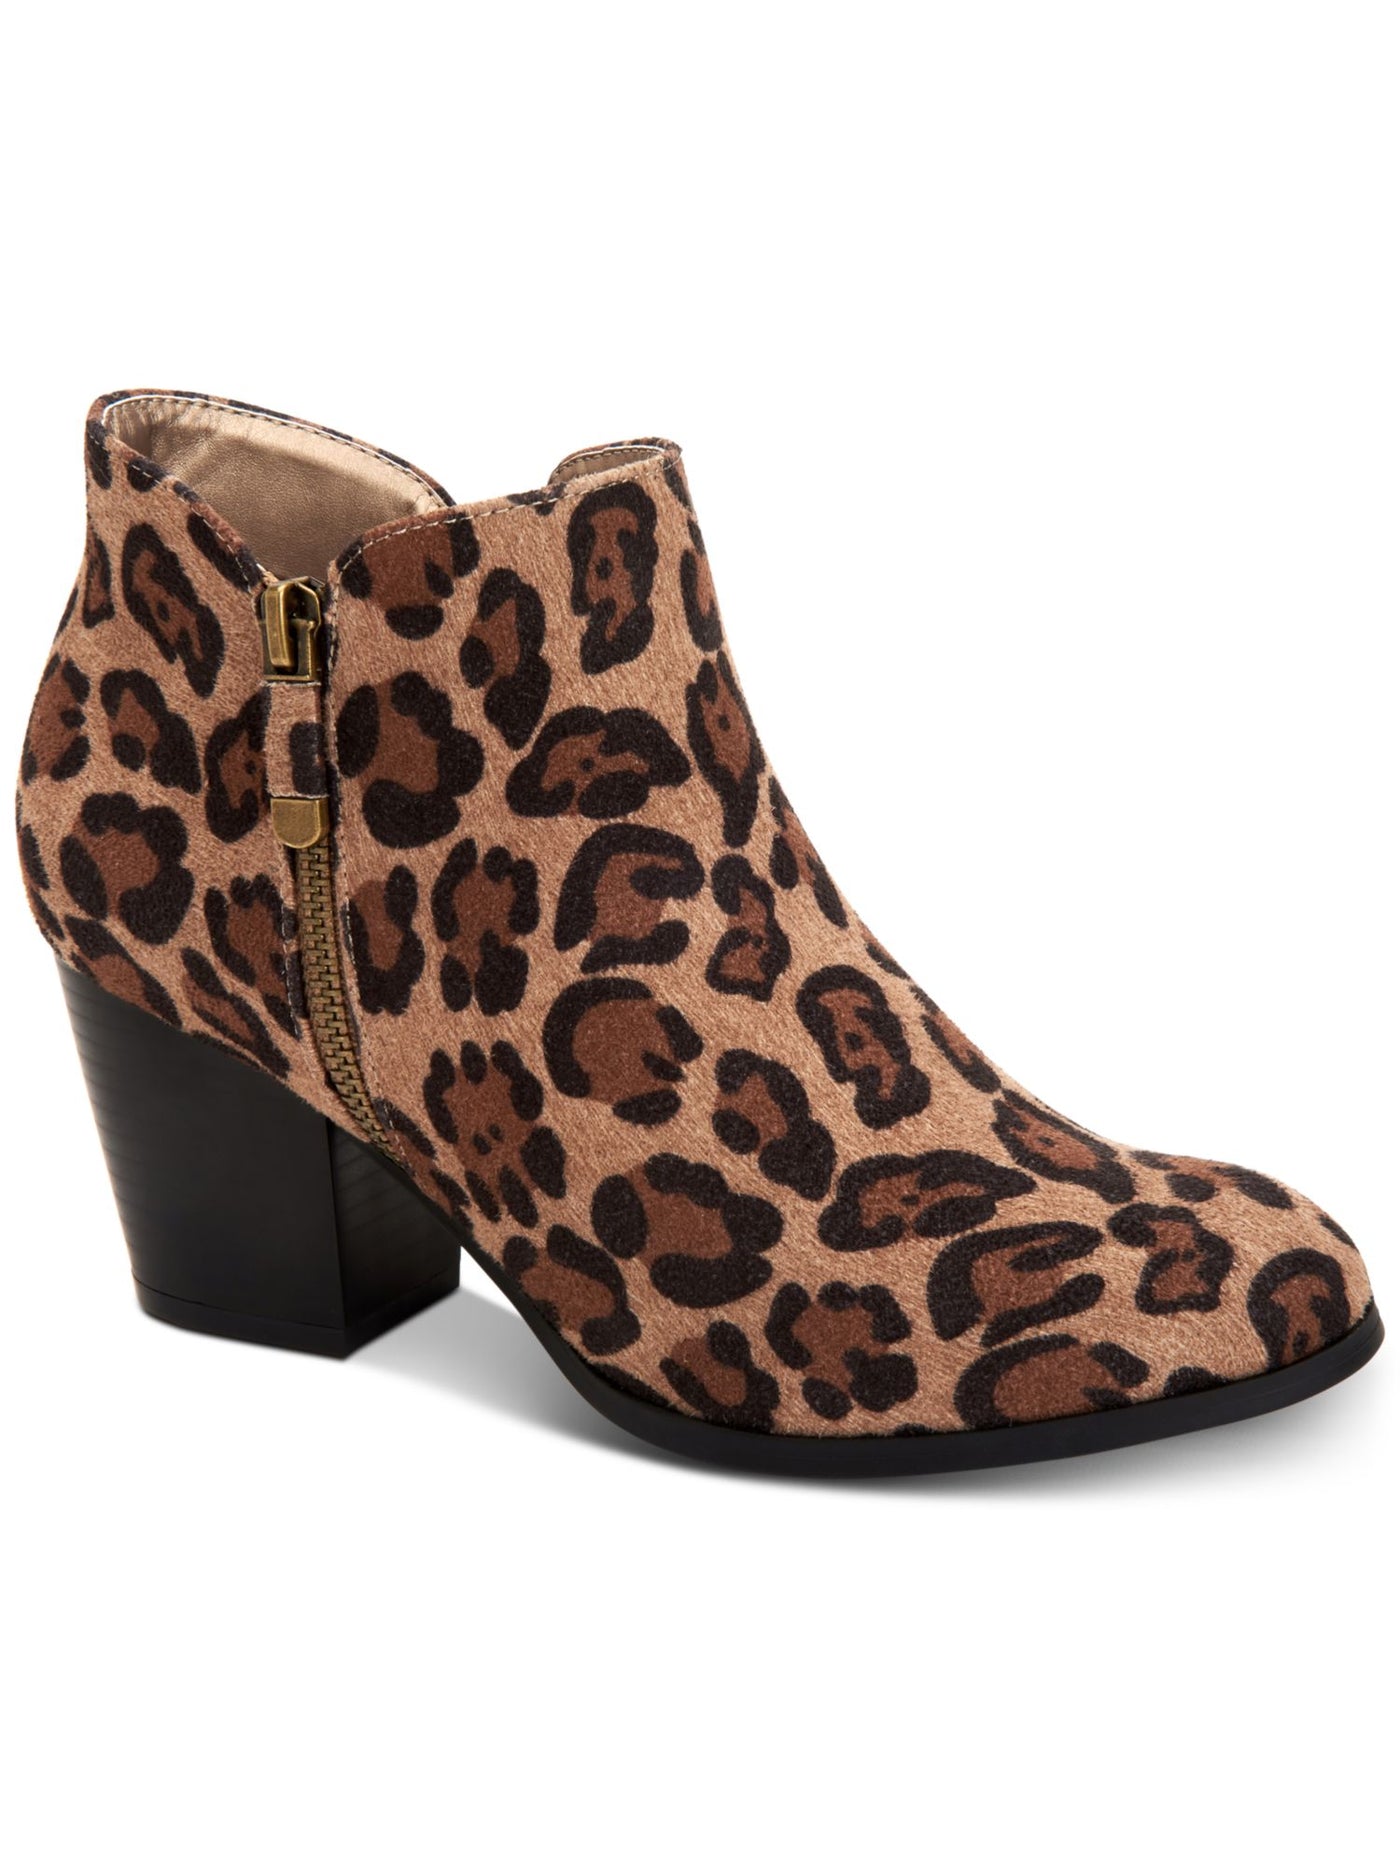 STYLE & COMPANY Womens Brown Animal Print Leopard Print Notched At Sides Cushioned Zipper Accent Masrinaa Almond Toe Block Heel Booties 7 W